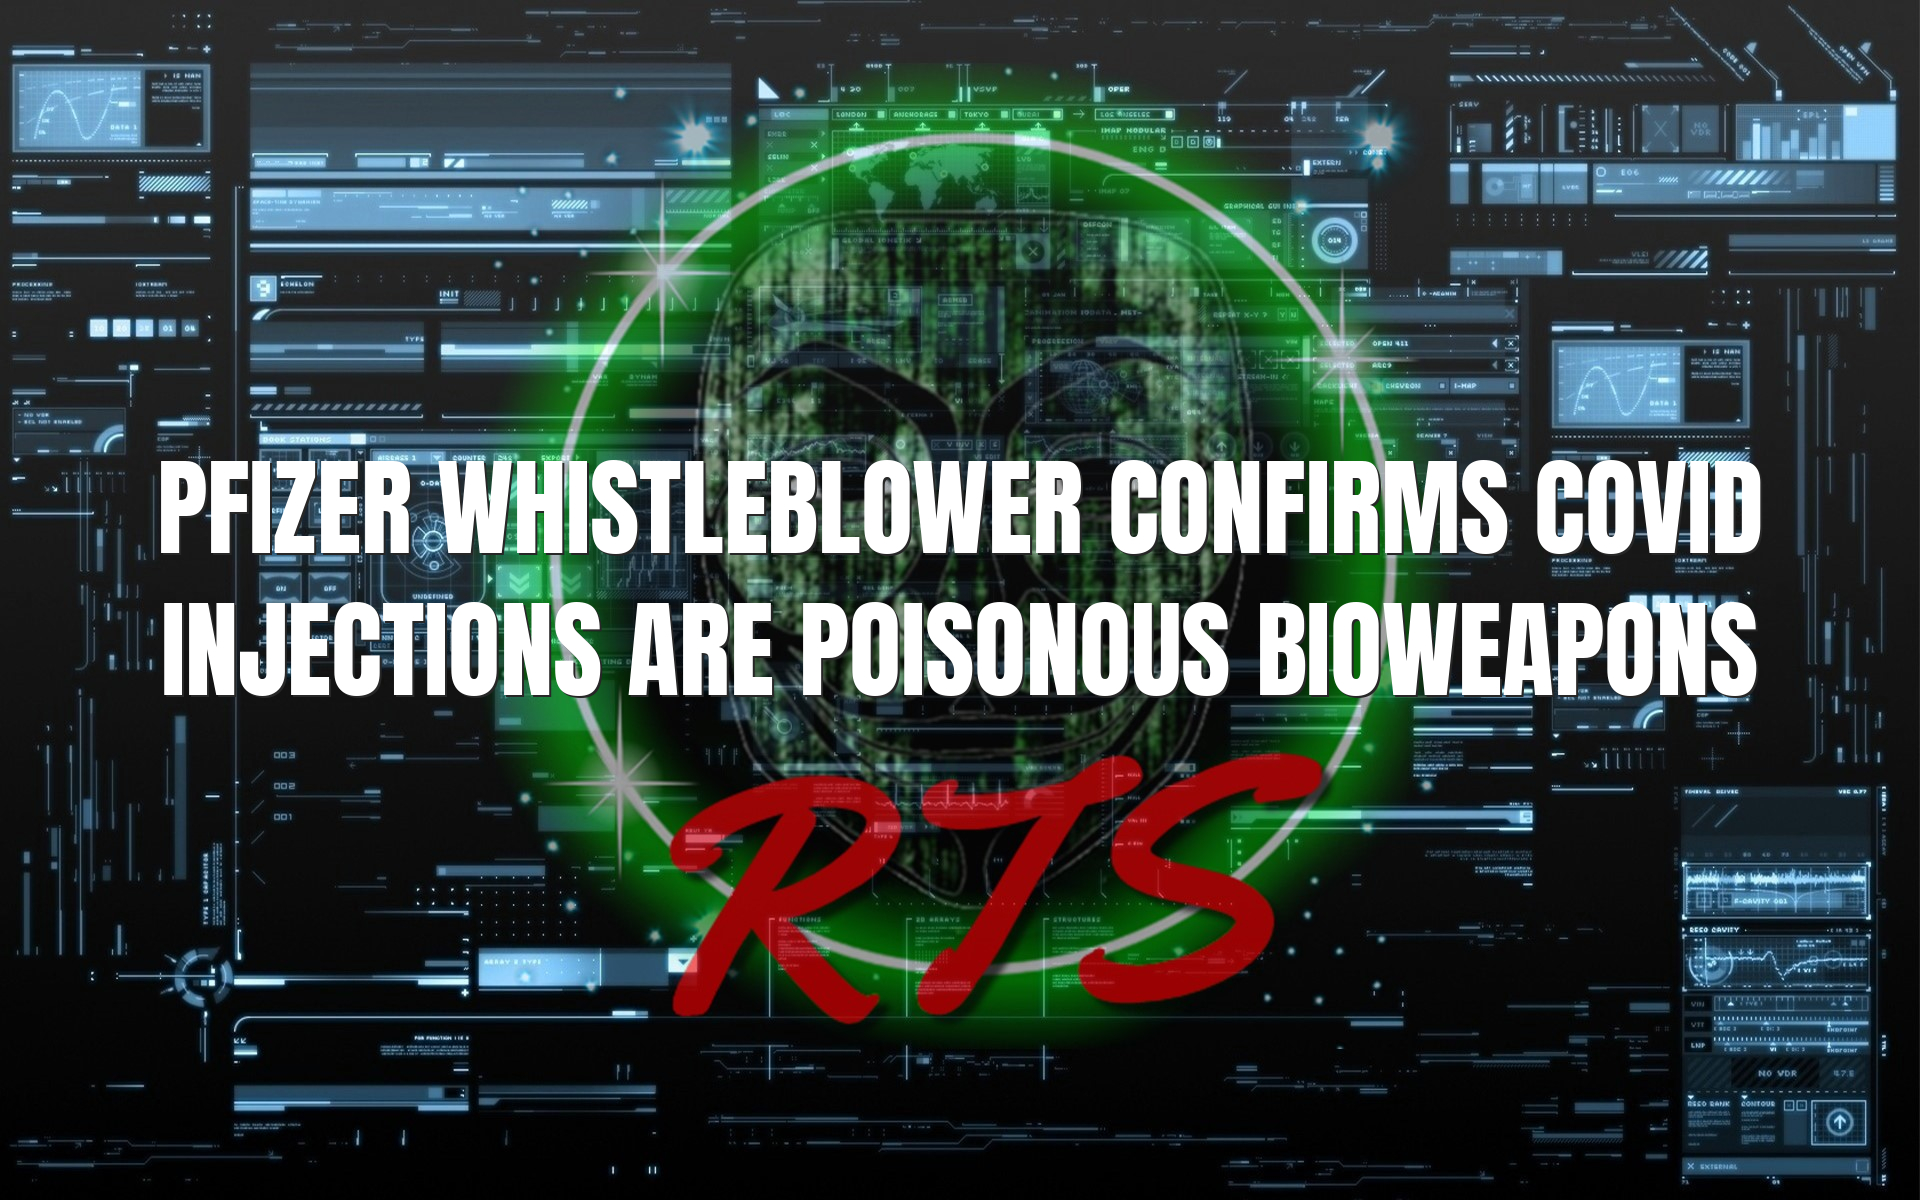 Pfizer Whistleblower Confirms COVID Injections are Poisonous Bioweapons